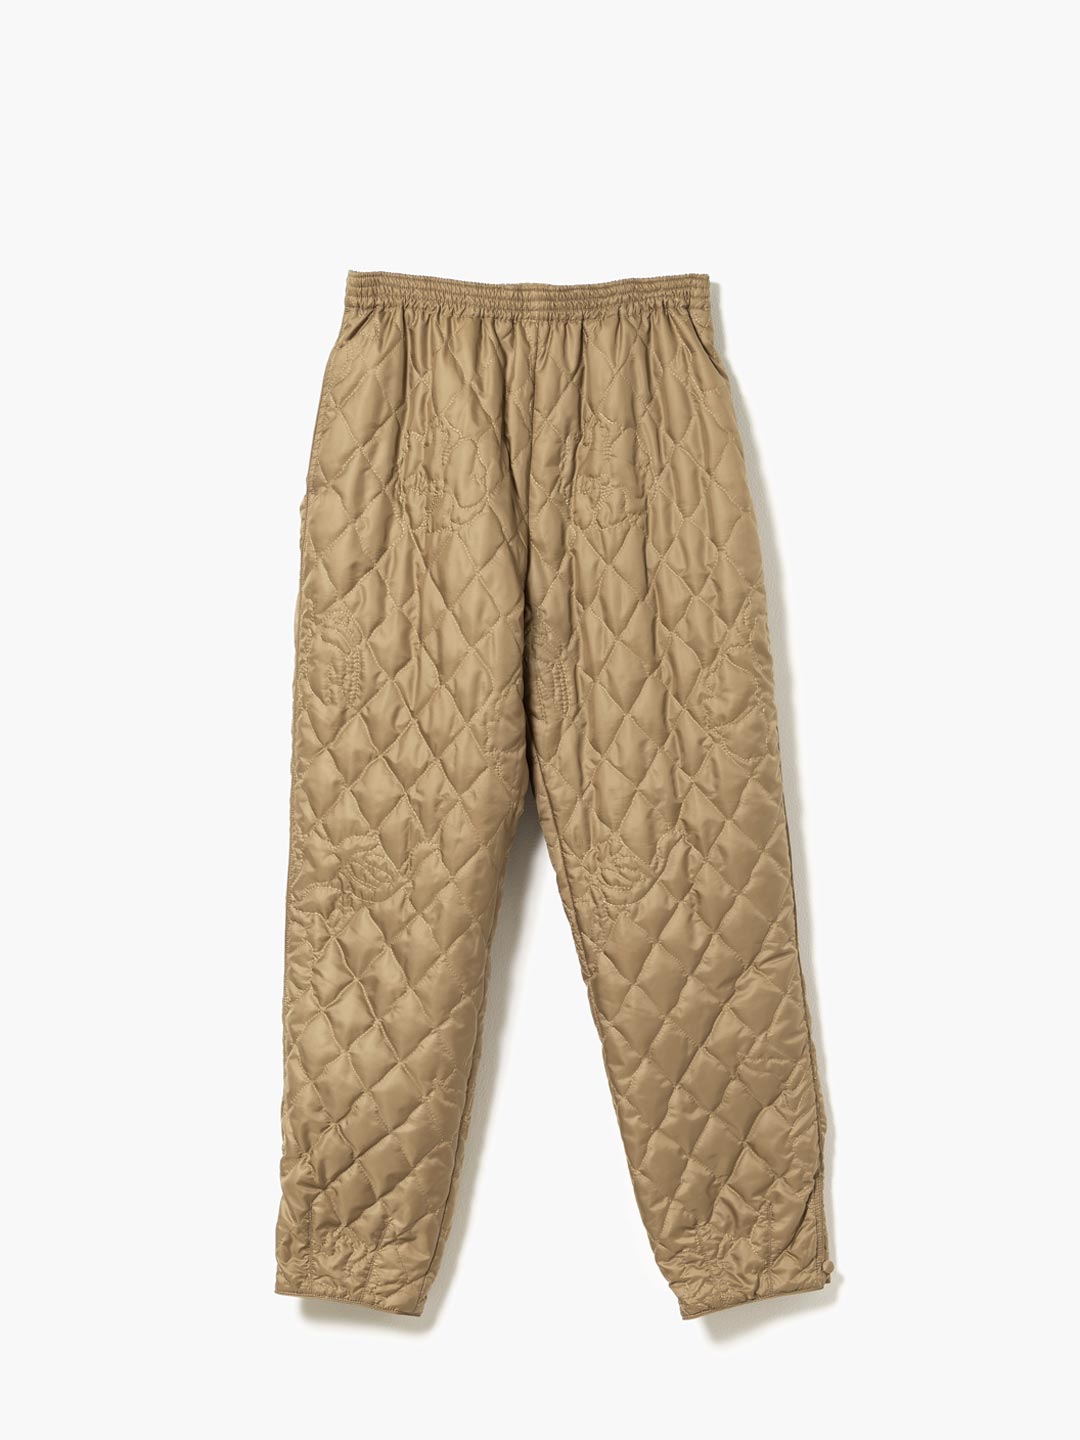 Quilted Sahara Trouser - Beige